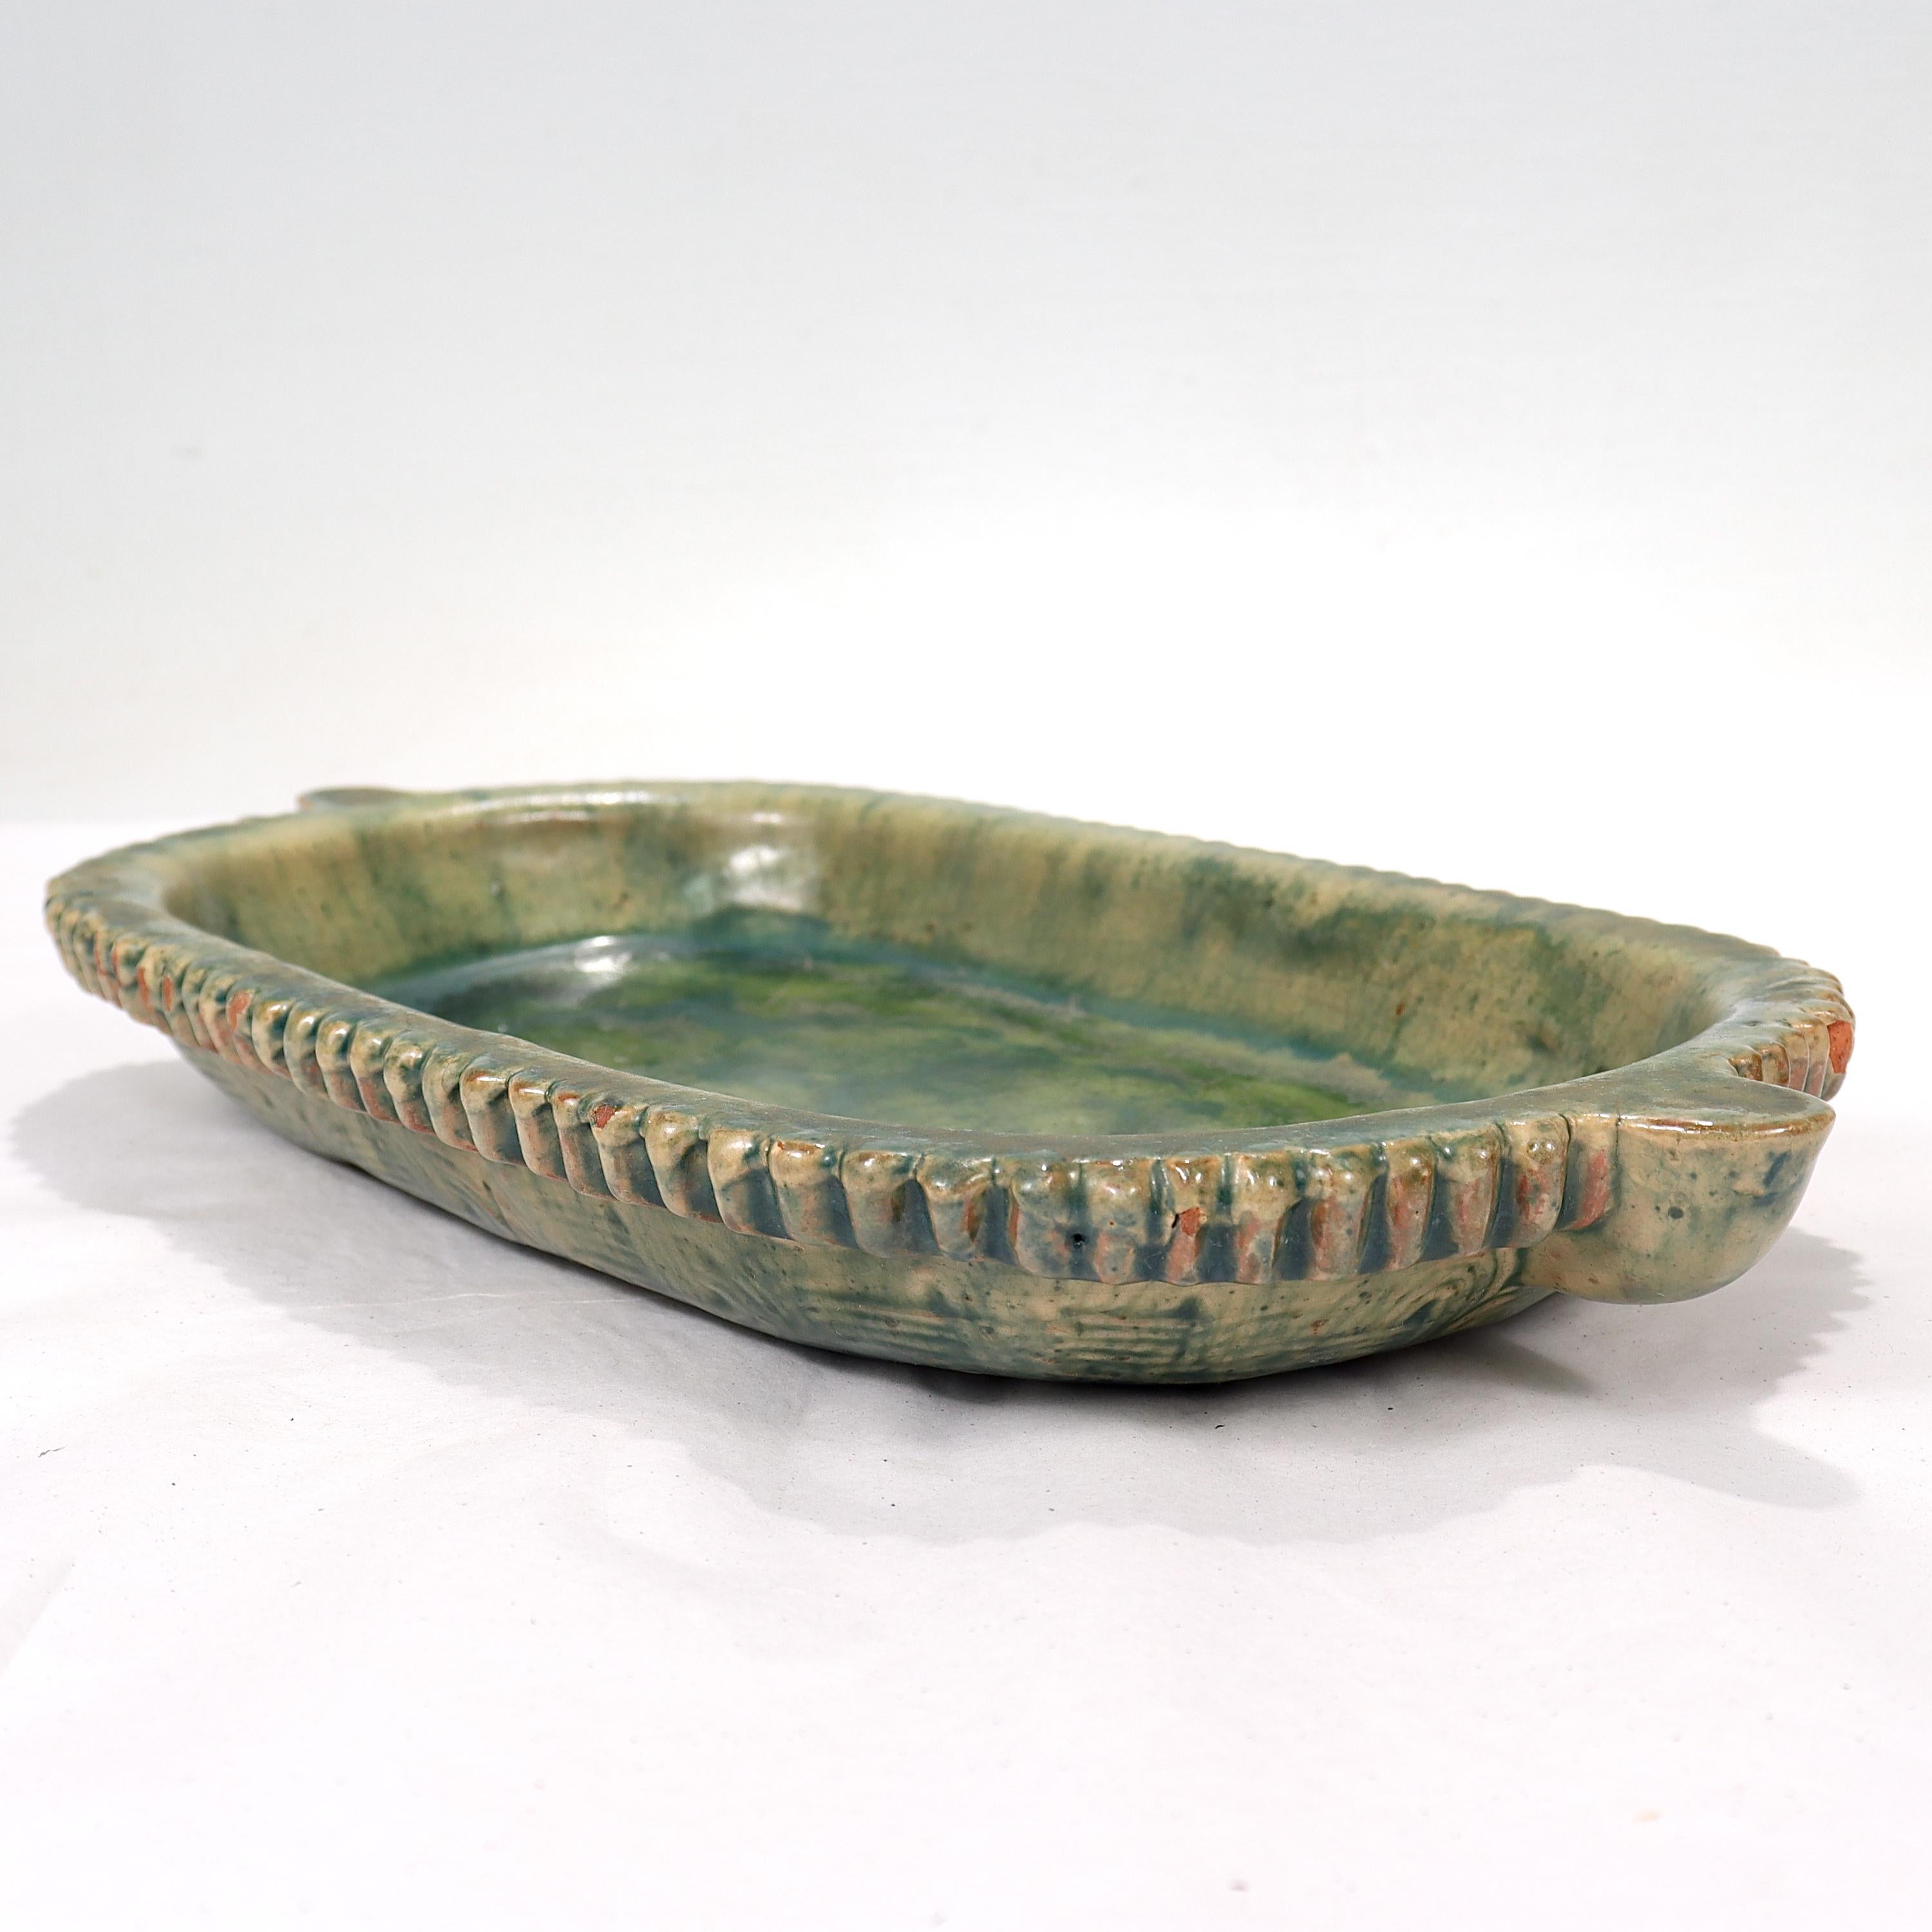 A fine, rare, American Arts & Crafts pottery low bowl or oblong plate.

In the form of a long oblong bowl or plate with protruding handles at either end. There is cracklature throughout that gives it an aged look.

The underside of the bowl is